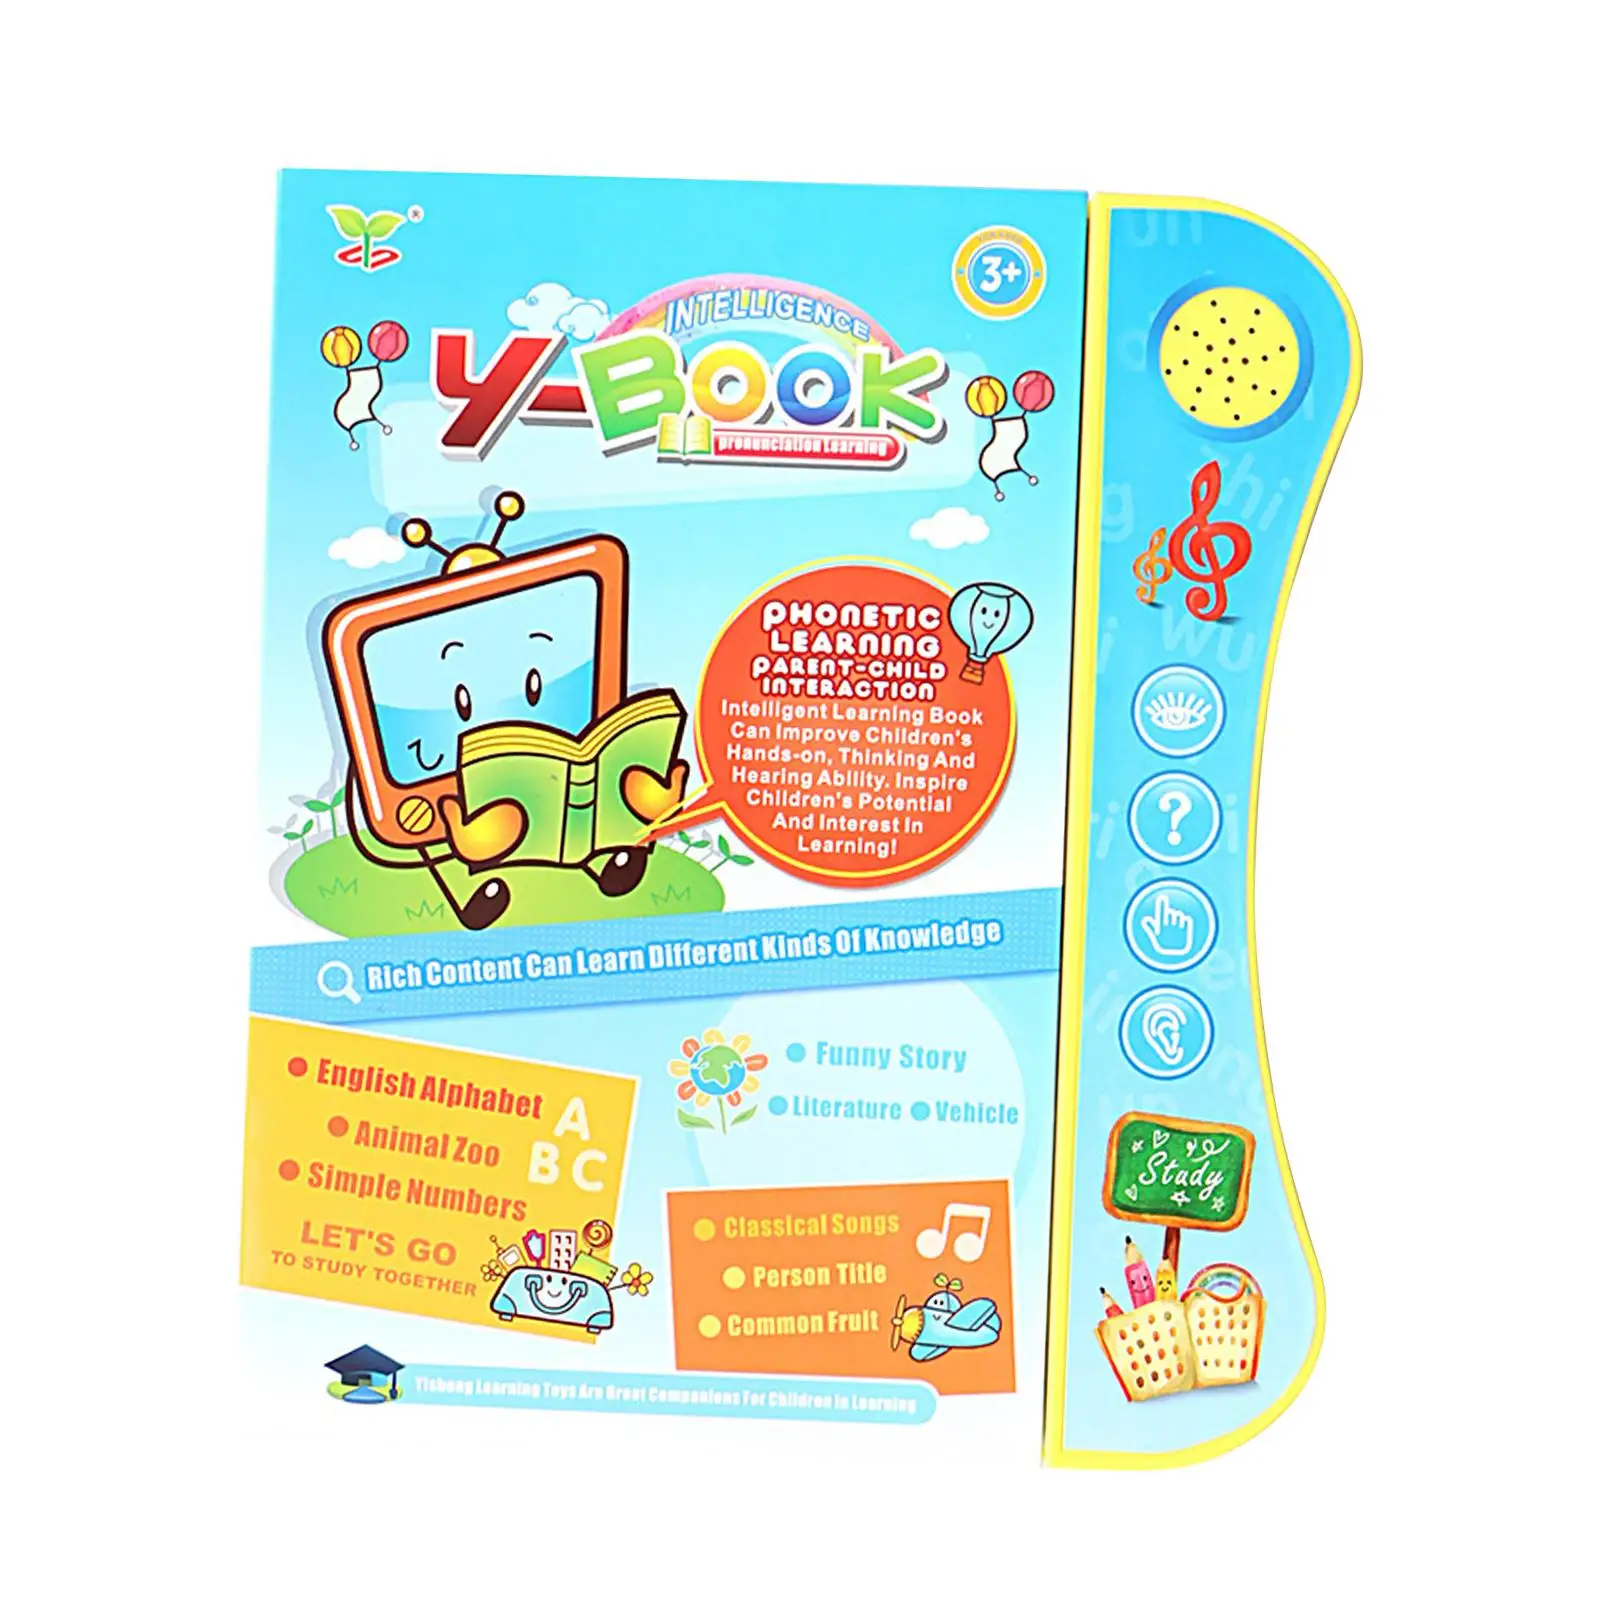 sound book for Baby Multipurpose Interactive Gift English Talking sound book for Number Language Animal Character Appellation